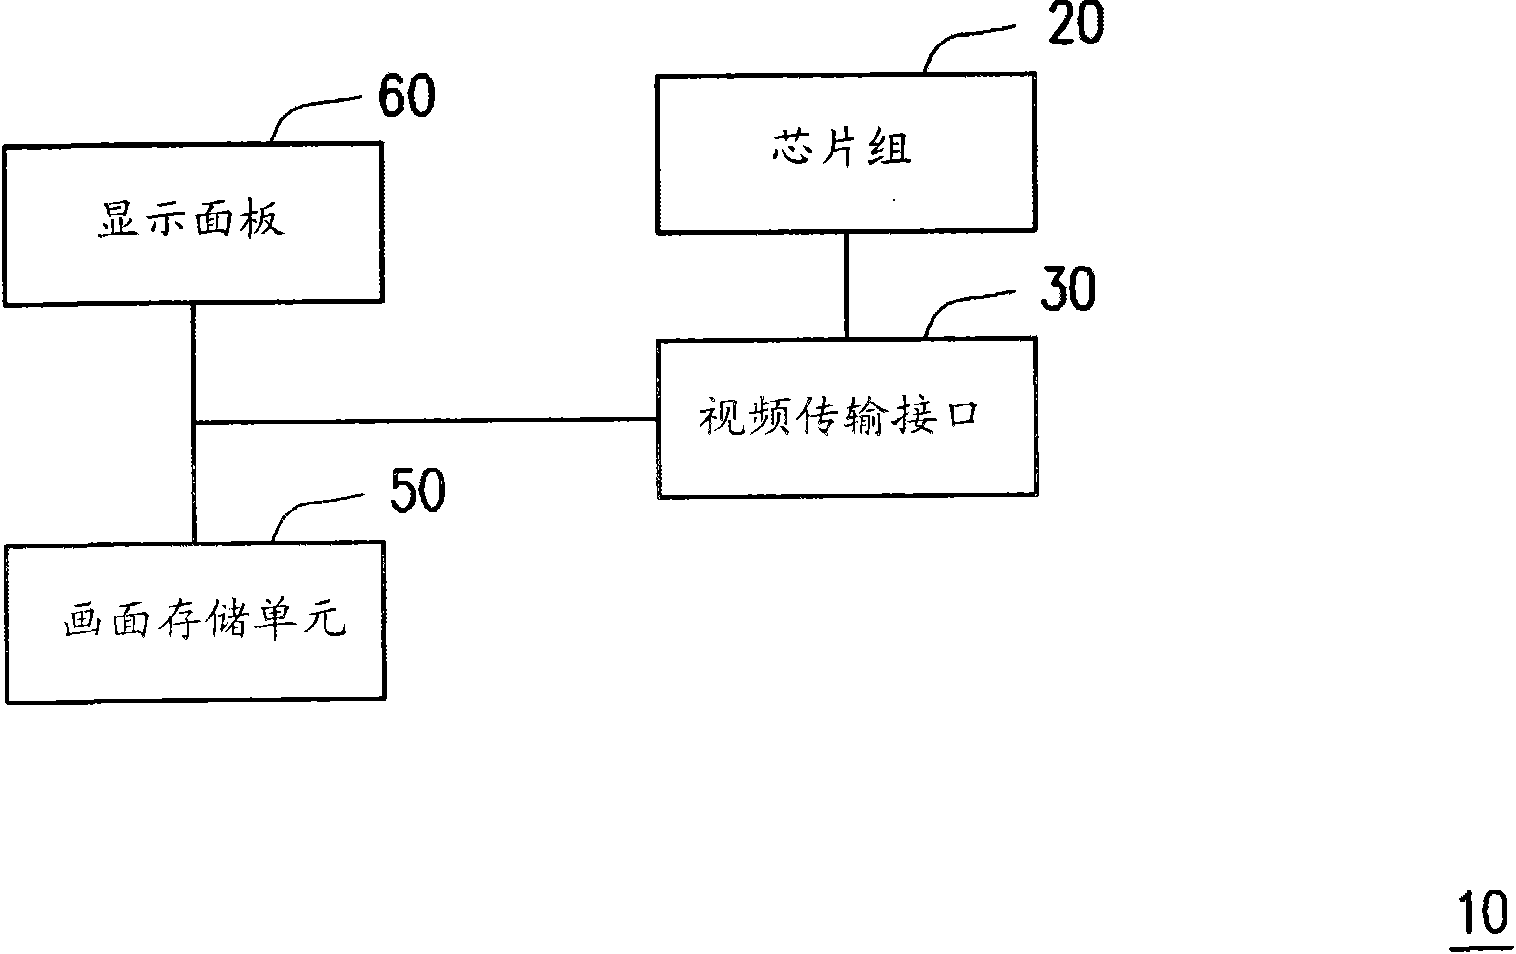 Display system and electricity saving method thereof